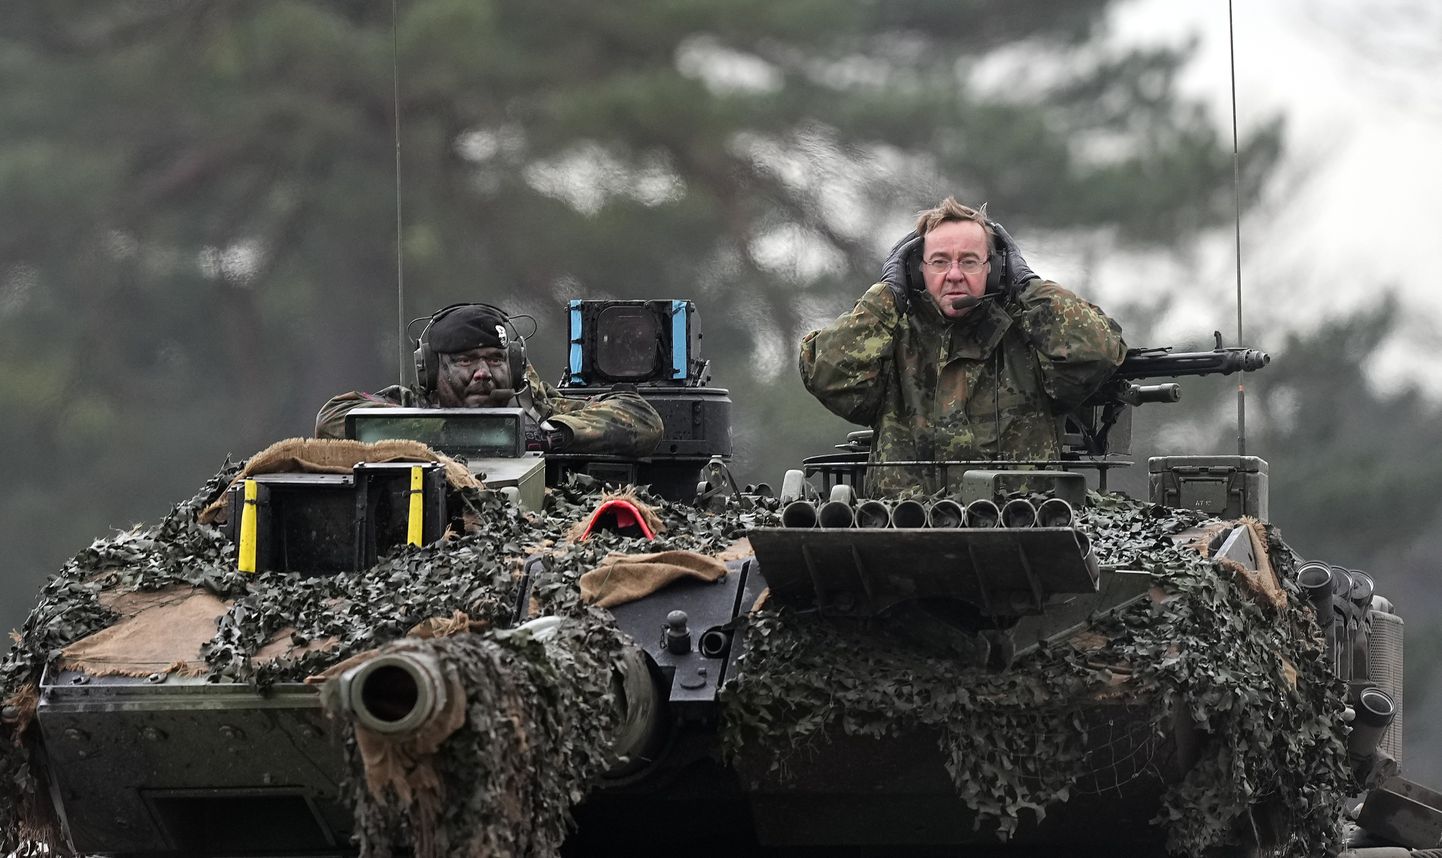 German Defense Minister Boris Pistorius, right, sits on a Leopard 2 tank at the Bundeswehr tank battalion 203 at the Field Marshal Rommel Barracks in Augustdorf, Germany, Wednesday, Feb. 1, 2023.